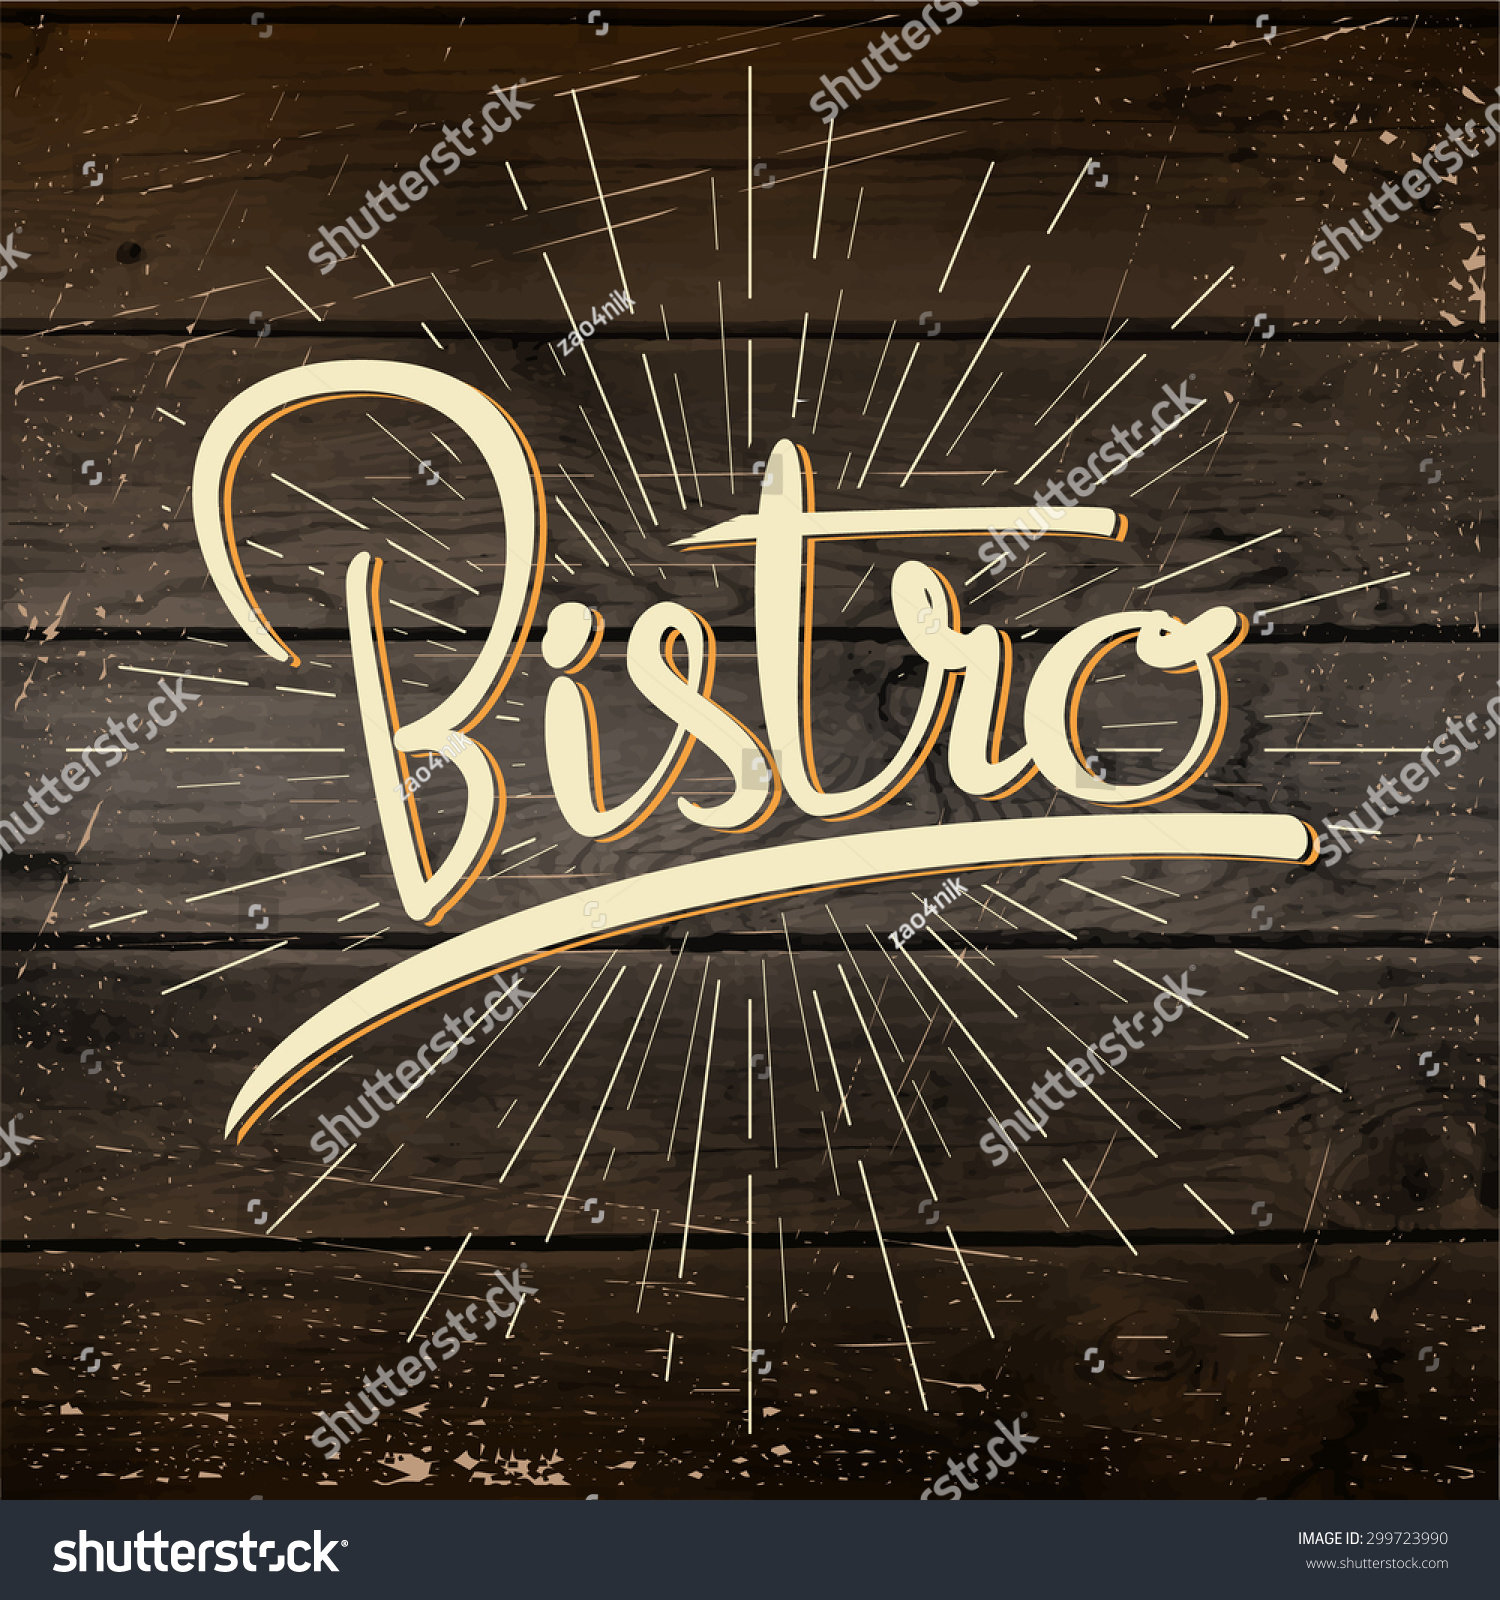 stock-vector-bistro-badges-logos-and-labels-can-be-used-to-design-signage-bistro-restaurant-fast-food-on-299723990.jpg